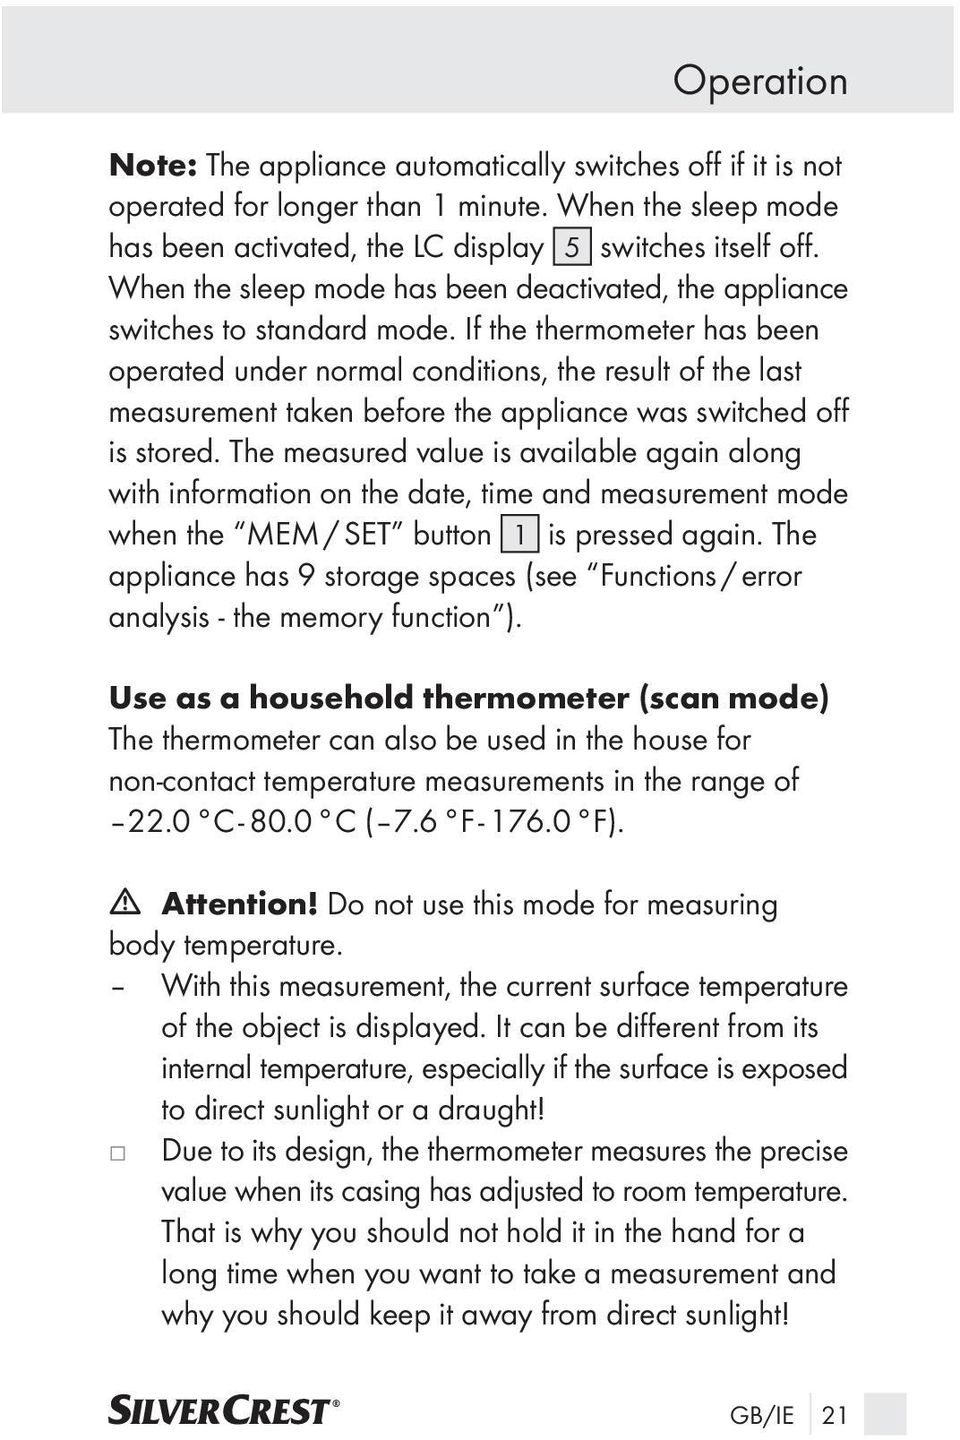 If the thermometer has been operated under normal conditions, the result of the last measurement taken before the appliance was switched off is stored.